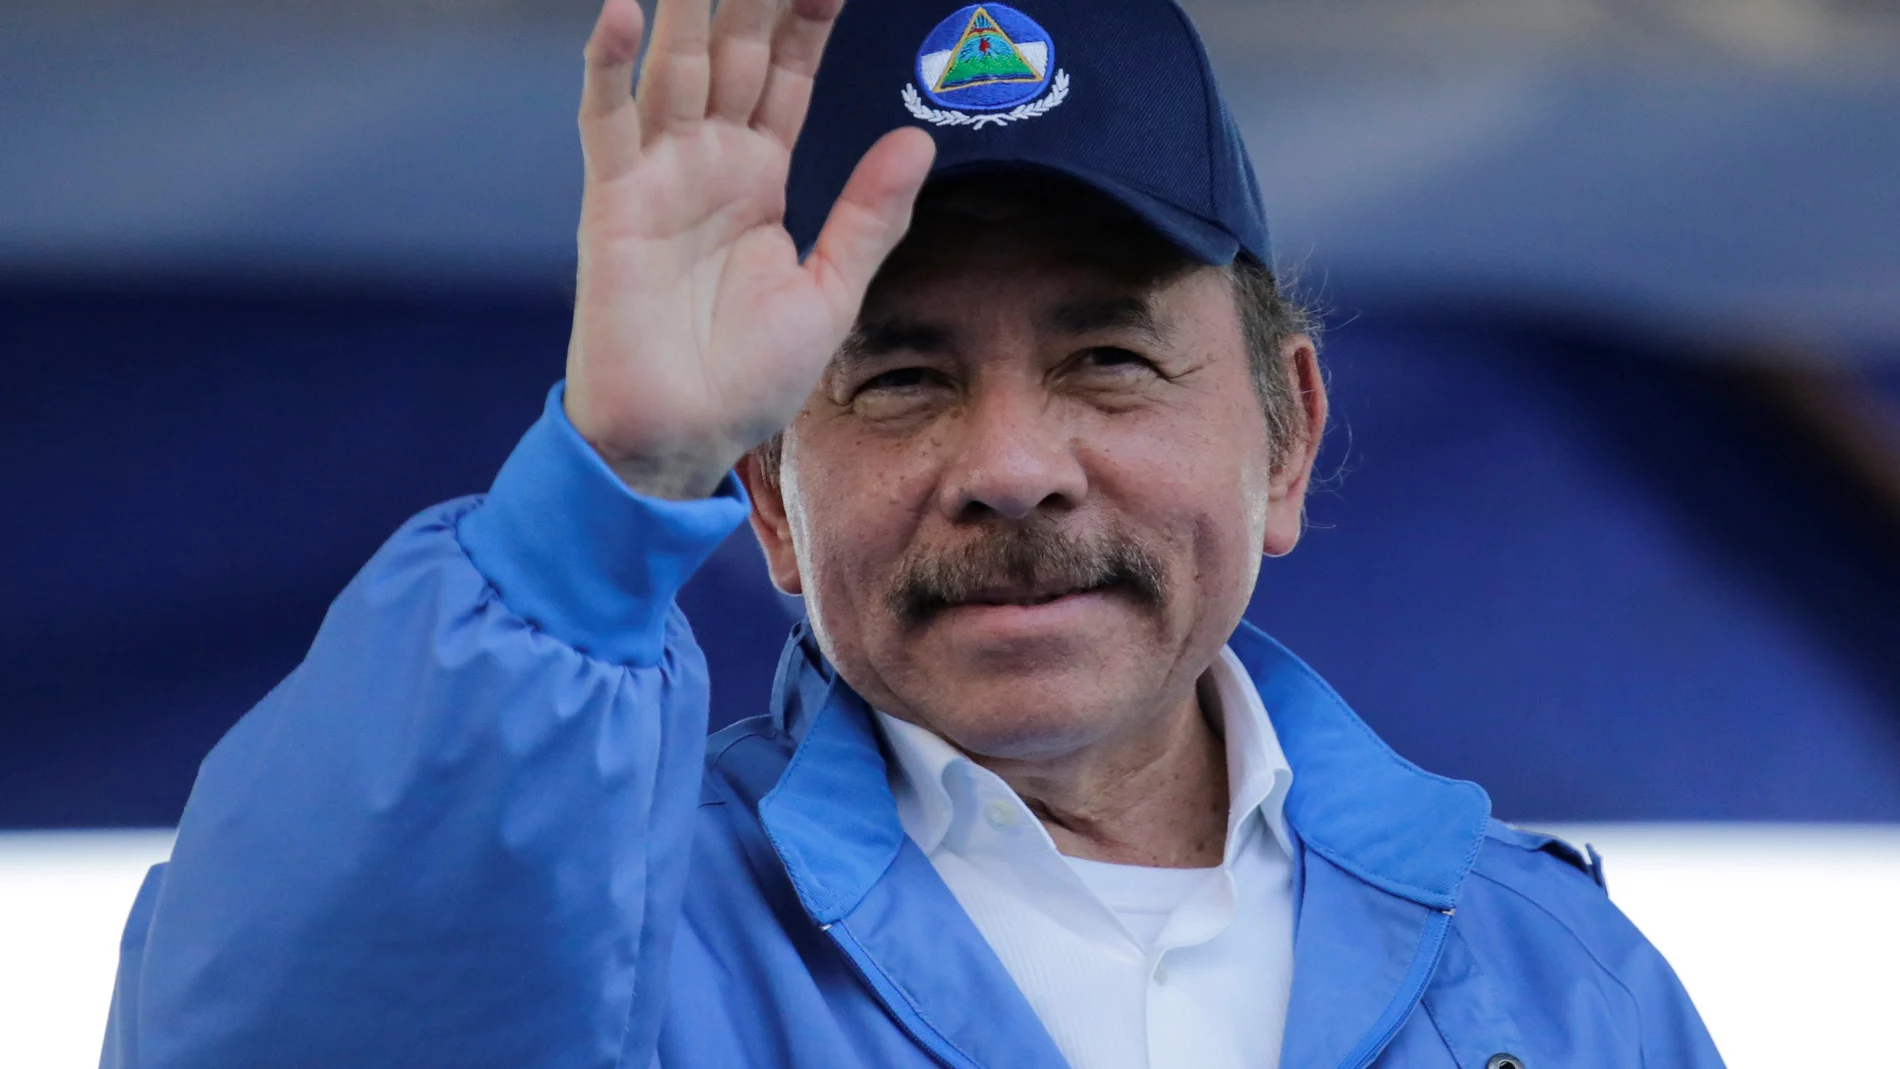 Nicaraguan President Danie Ortega waves to supporters during a march called "We walk for peace and life. Justice" in Managua, Nicaragua August 29, 2018.REUTERS/Oswaldo Rivas